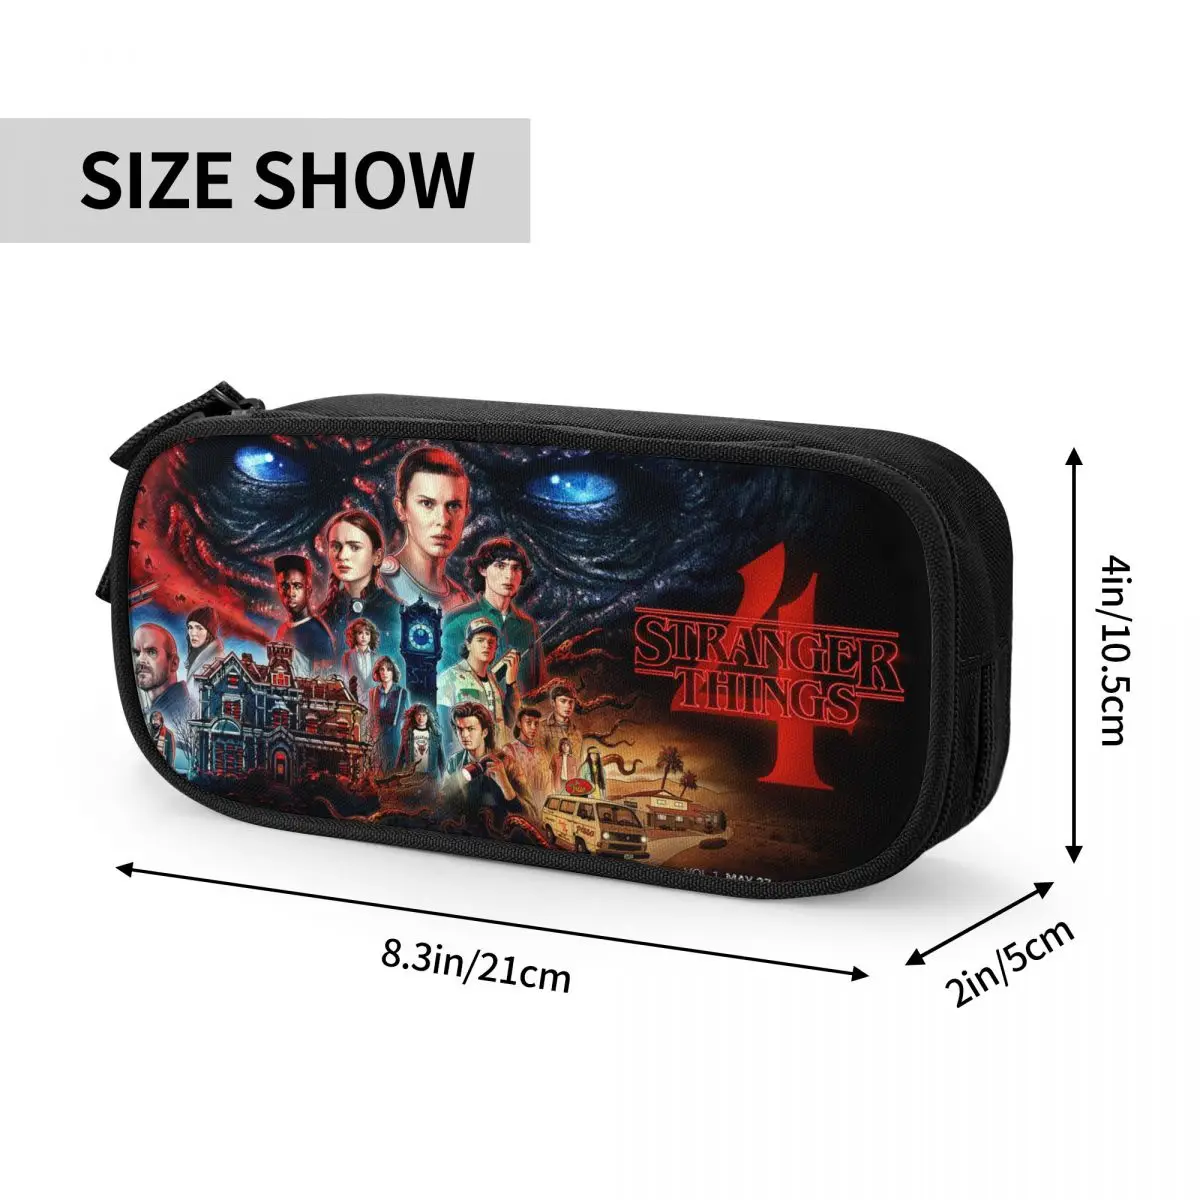 Stranger Pencil Cases Cute New Things Hot Movie Pen Holder Pencil Bags Girl Boy Large Storage School Supplies Pencil Box images - 6